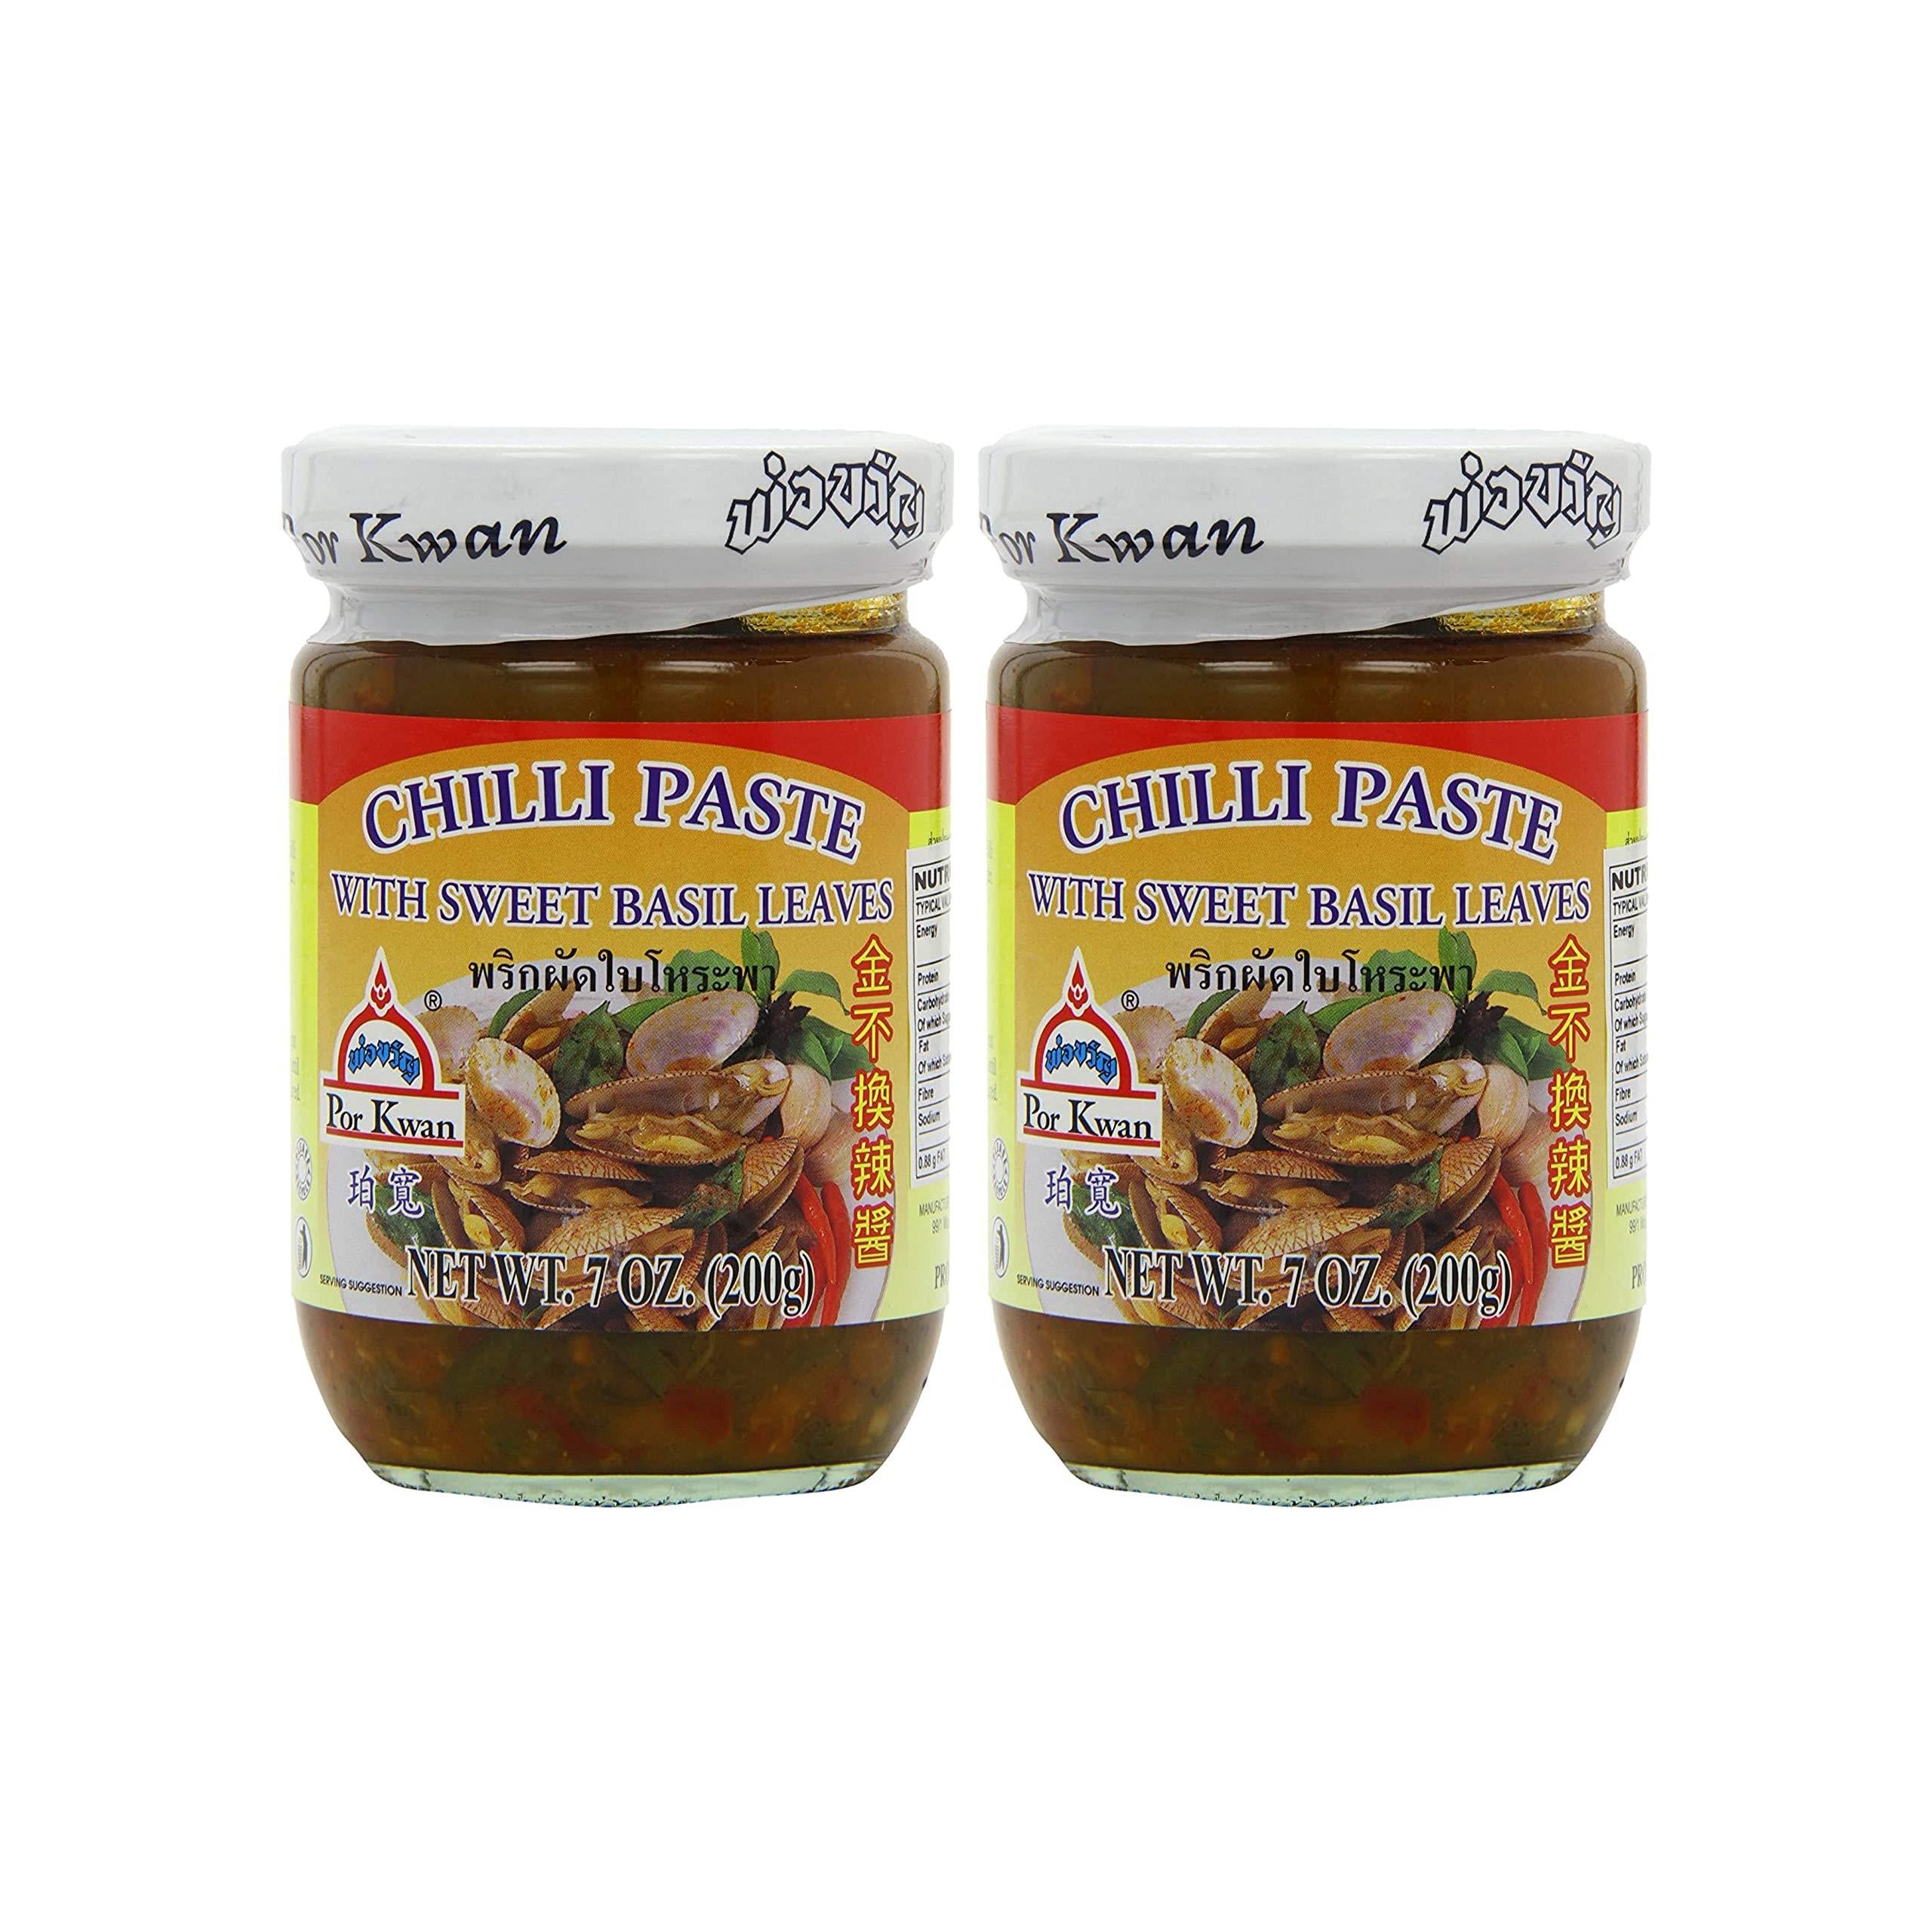 Por Kwan Thai Chili Paste with Sweet Basil Leaves (2 Pack, Total of 14oz)